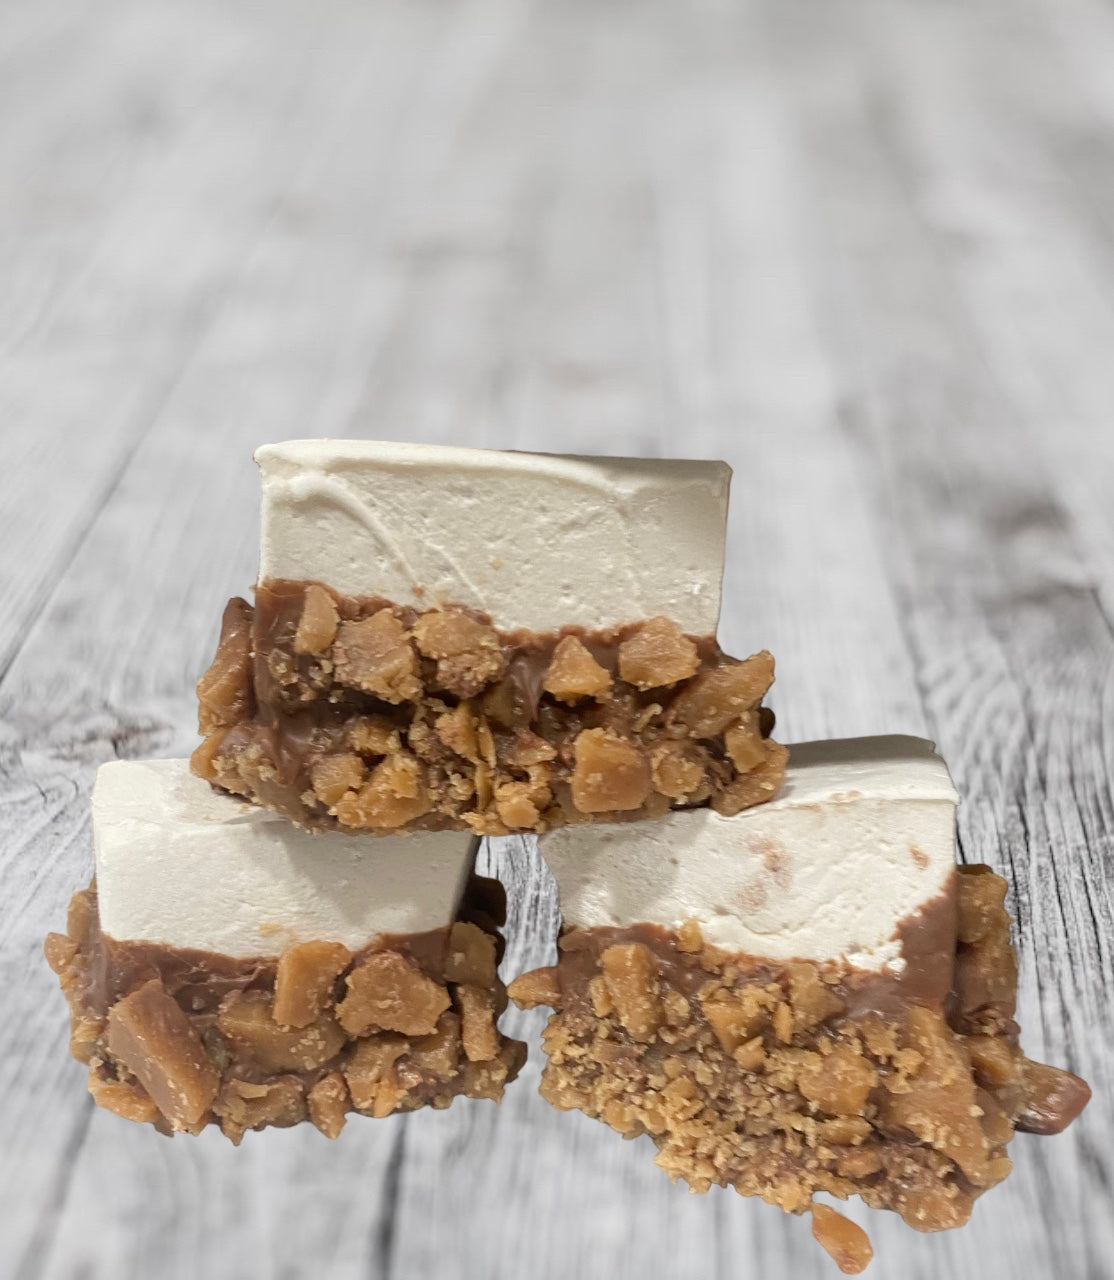 Gourmet Marshmallow With Toffee